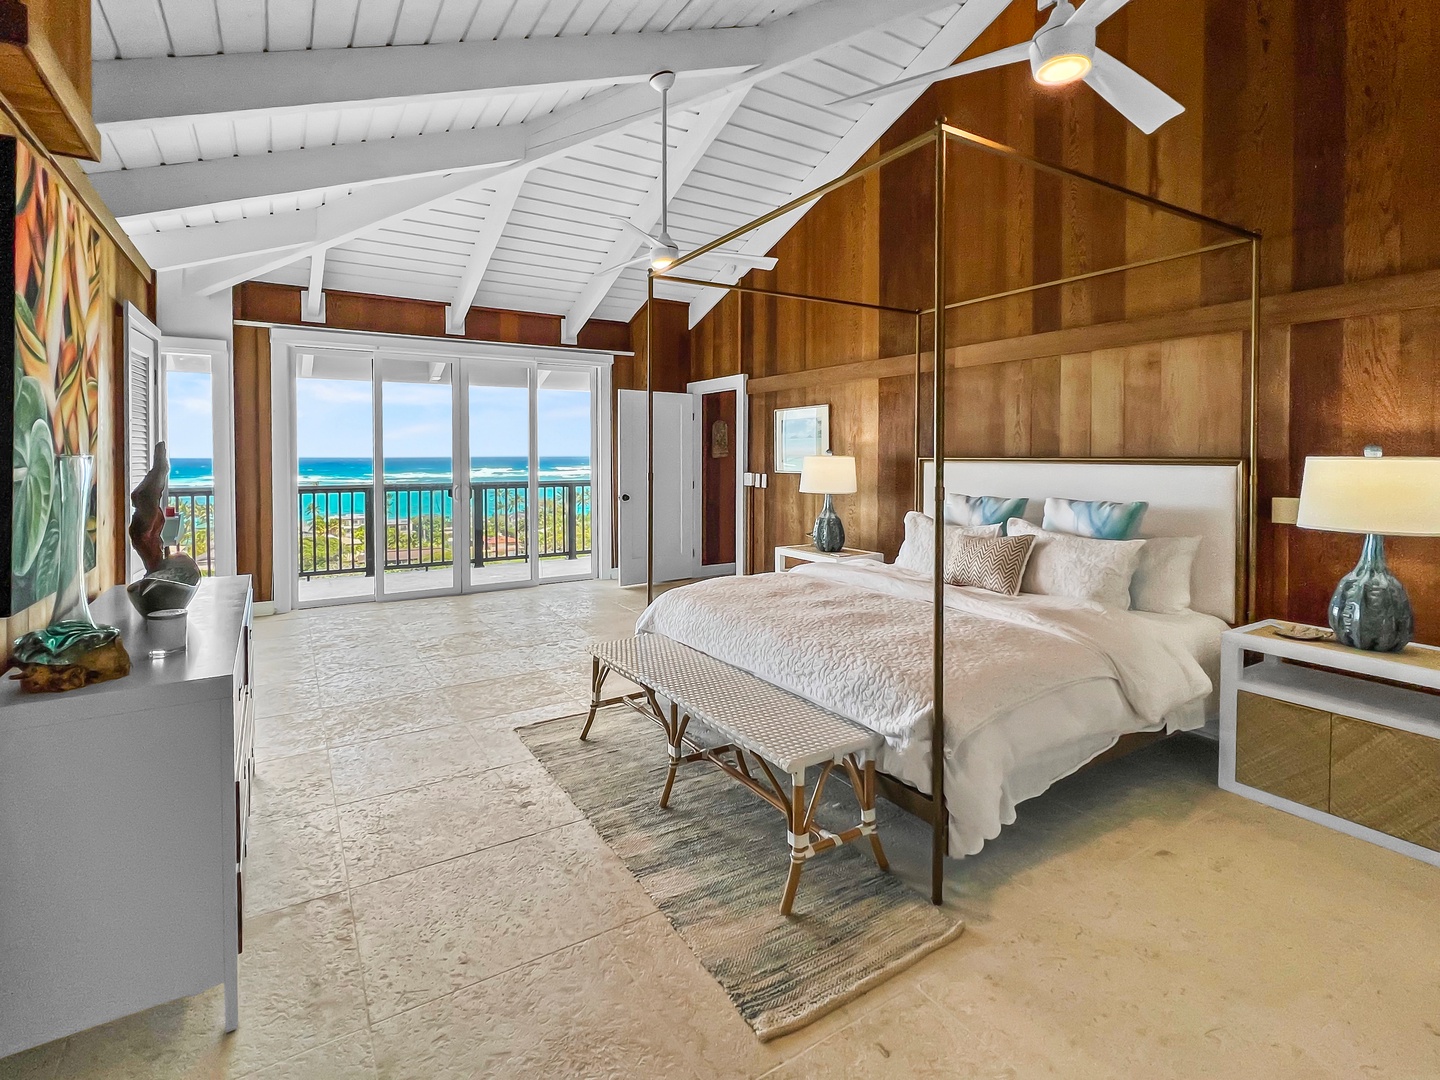 Kailua Vacation Rentals, Hale Lani - Primary bedroom has a king bed and gorgeous views